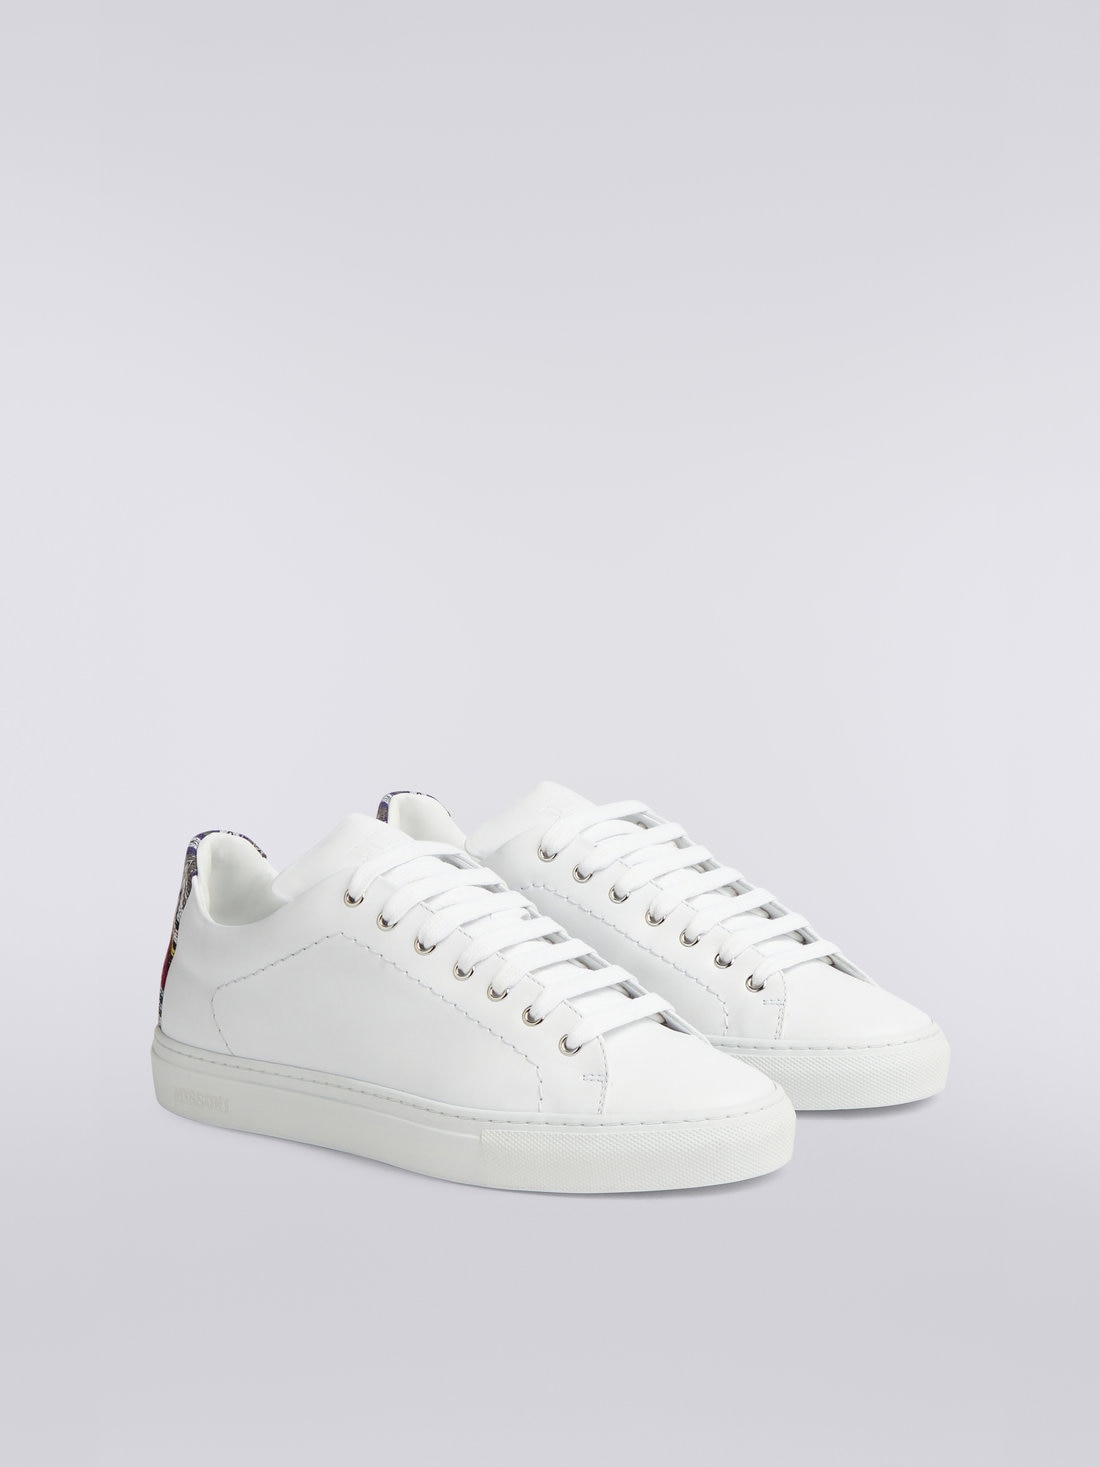 Leather trainers with chevron knit details, White  - OS23SY02BL007USM8MU - 1